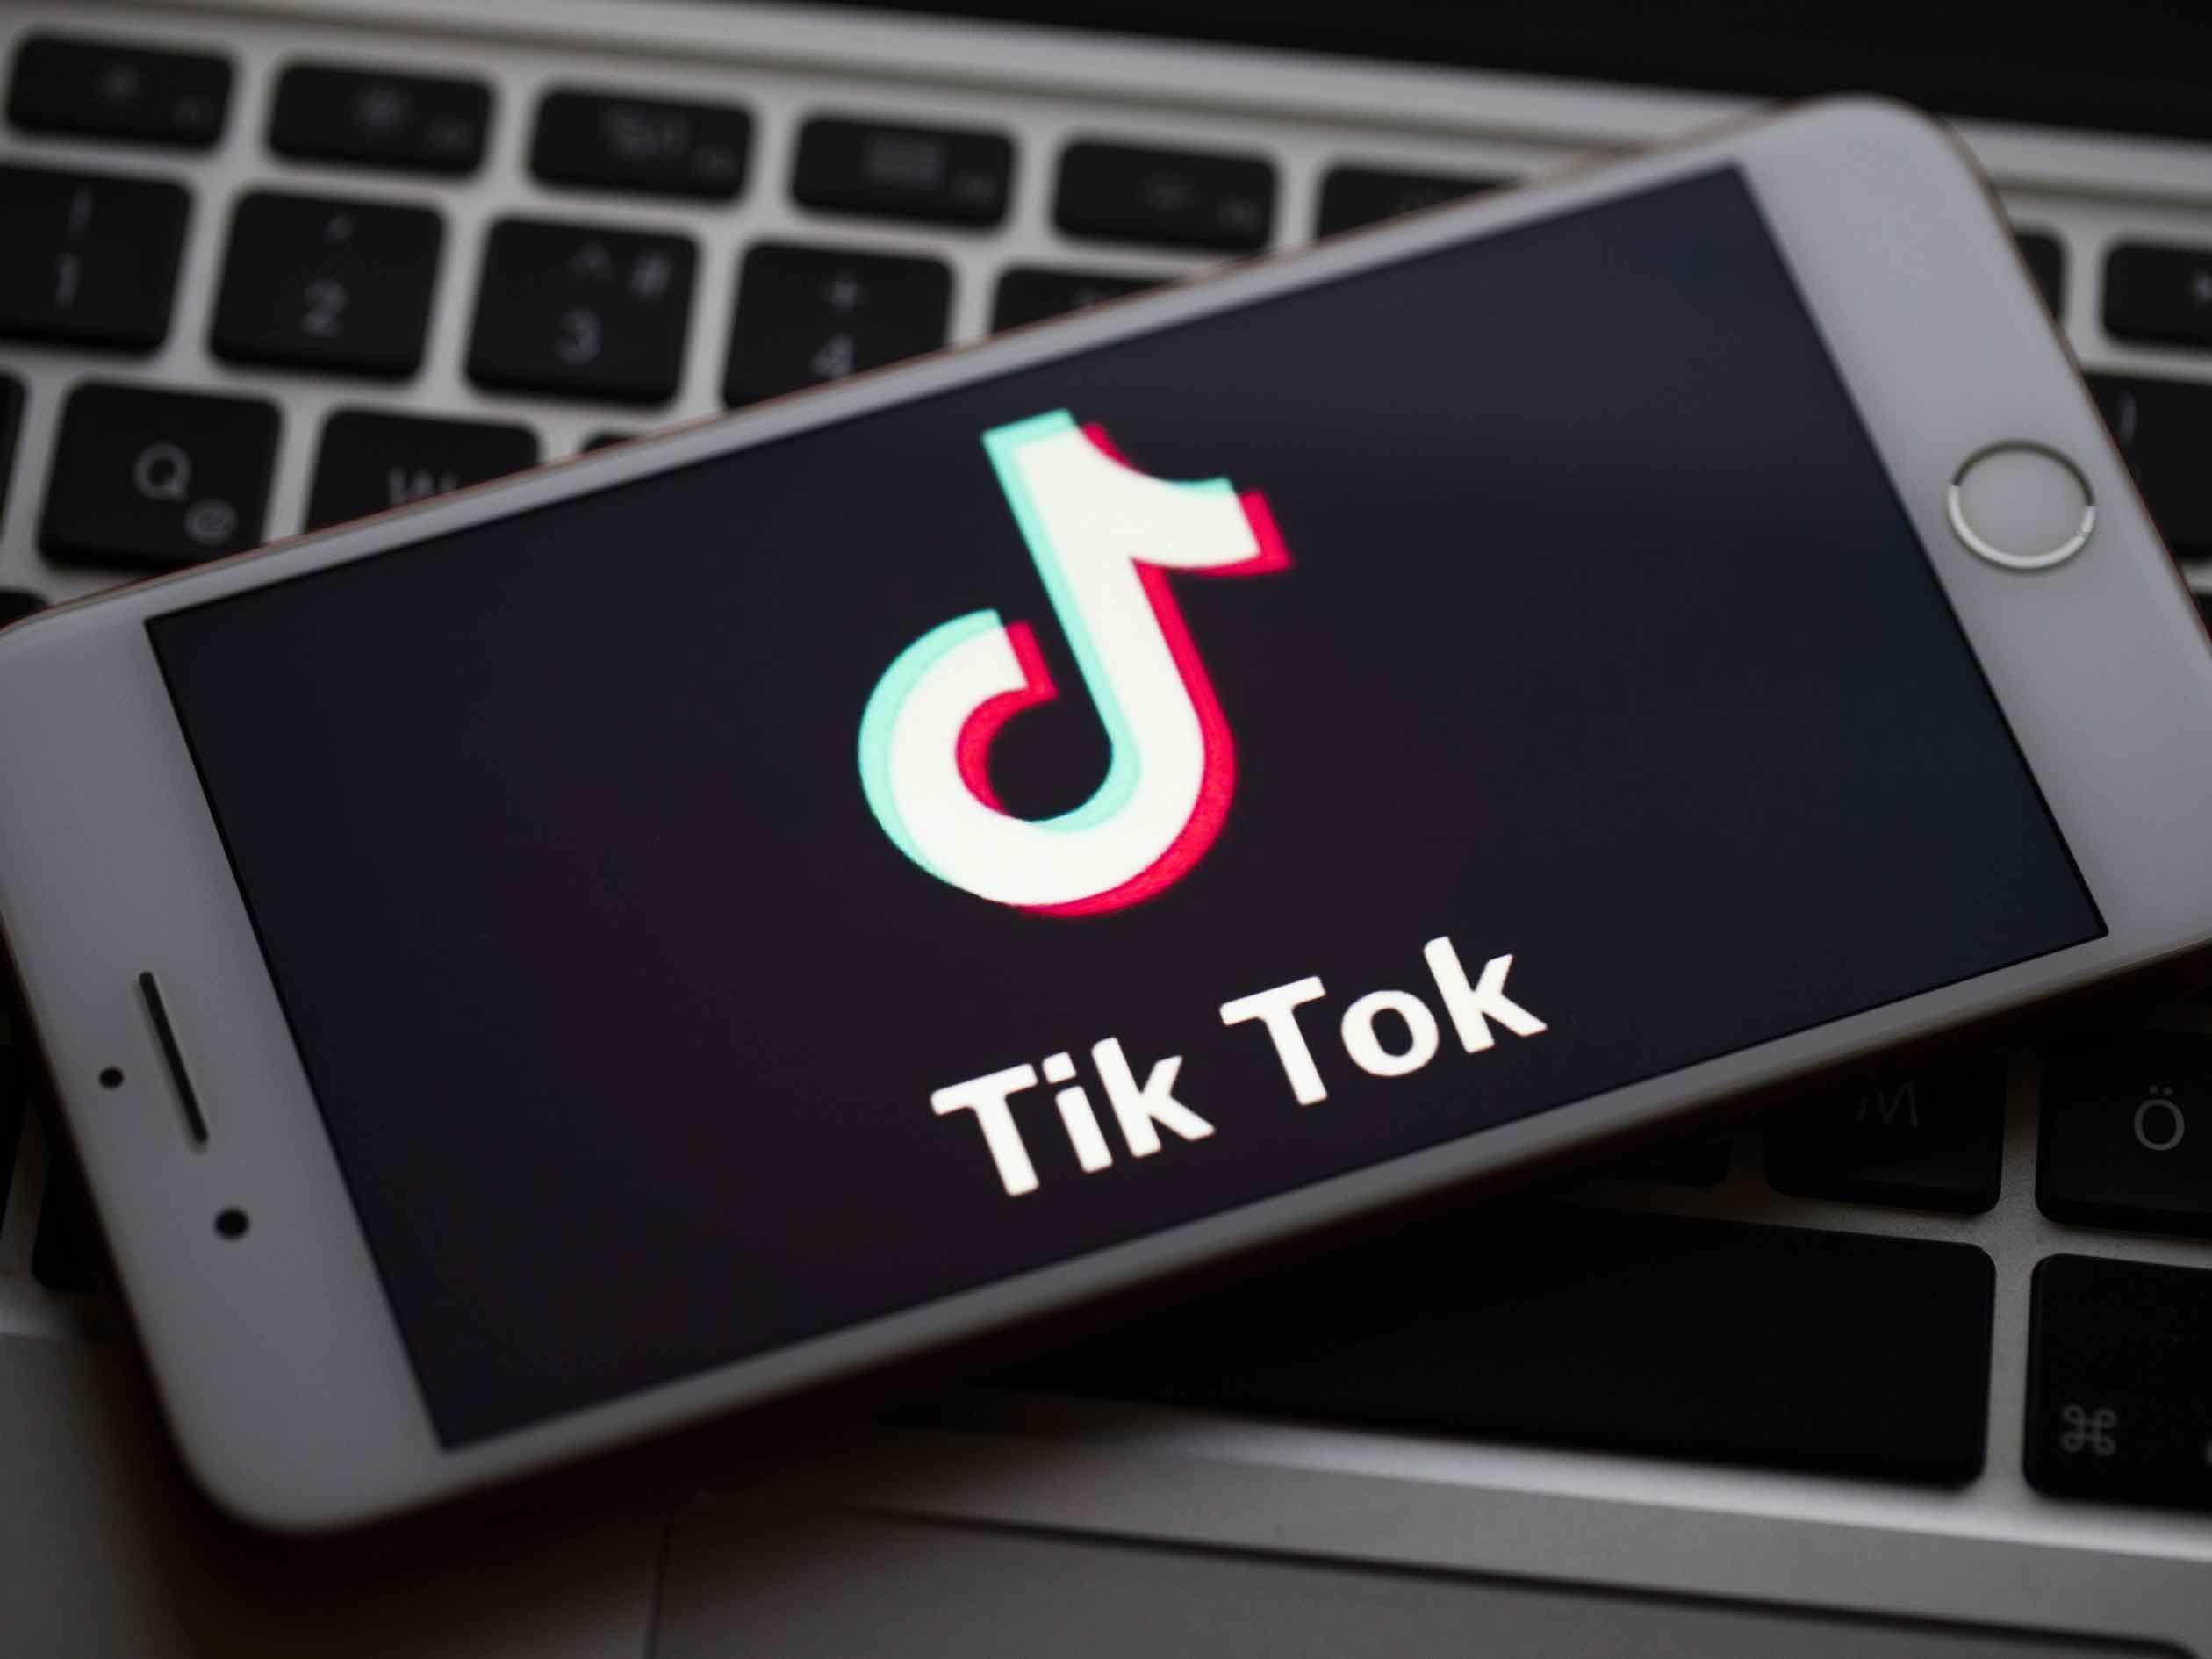 TikTok has been banned in some countries